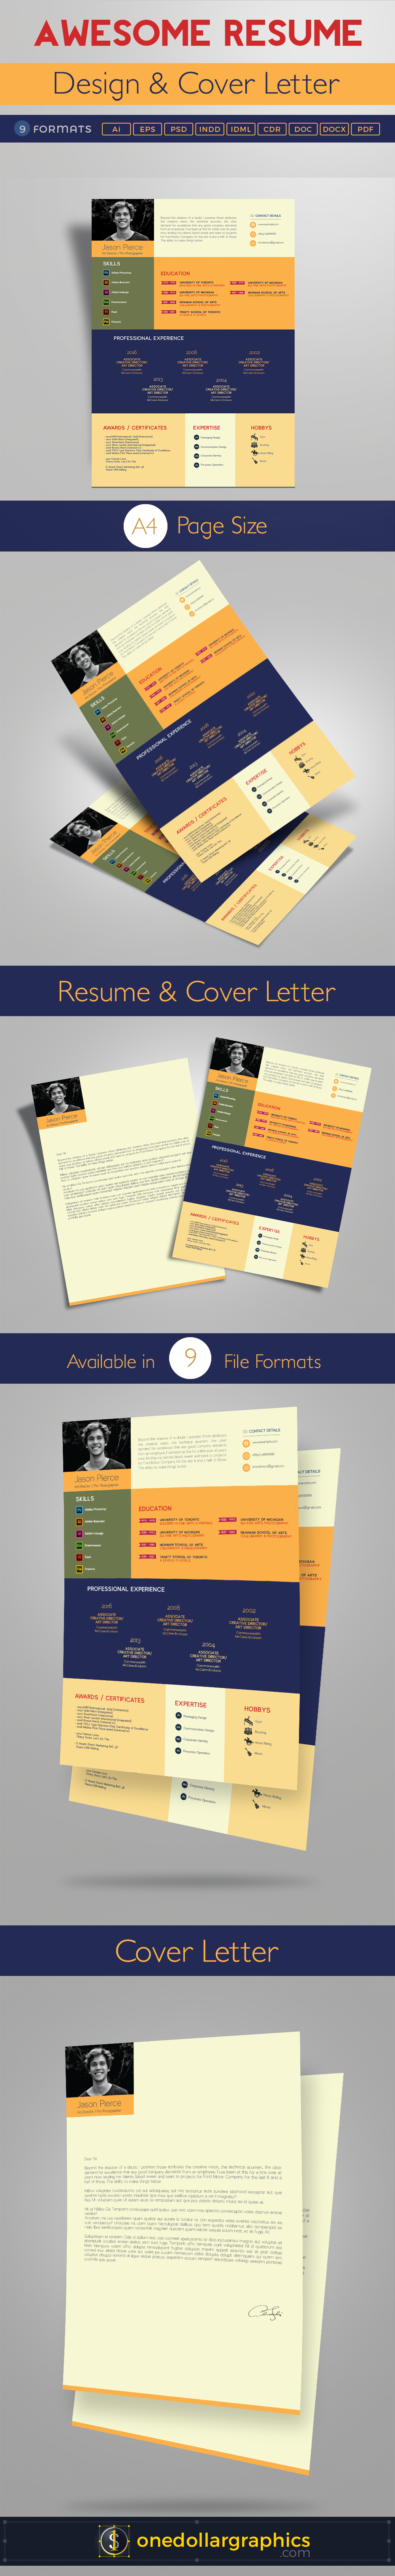 awesome resume  cv  design  cover letter template  4 psd